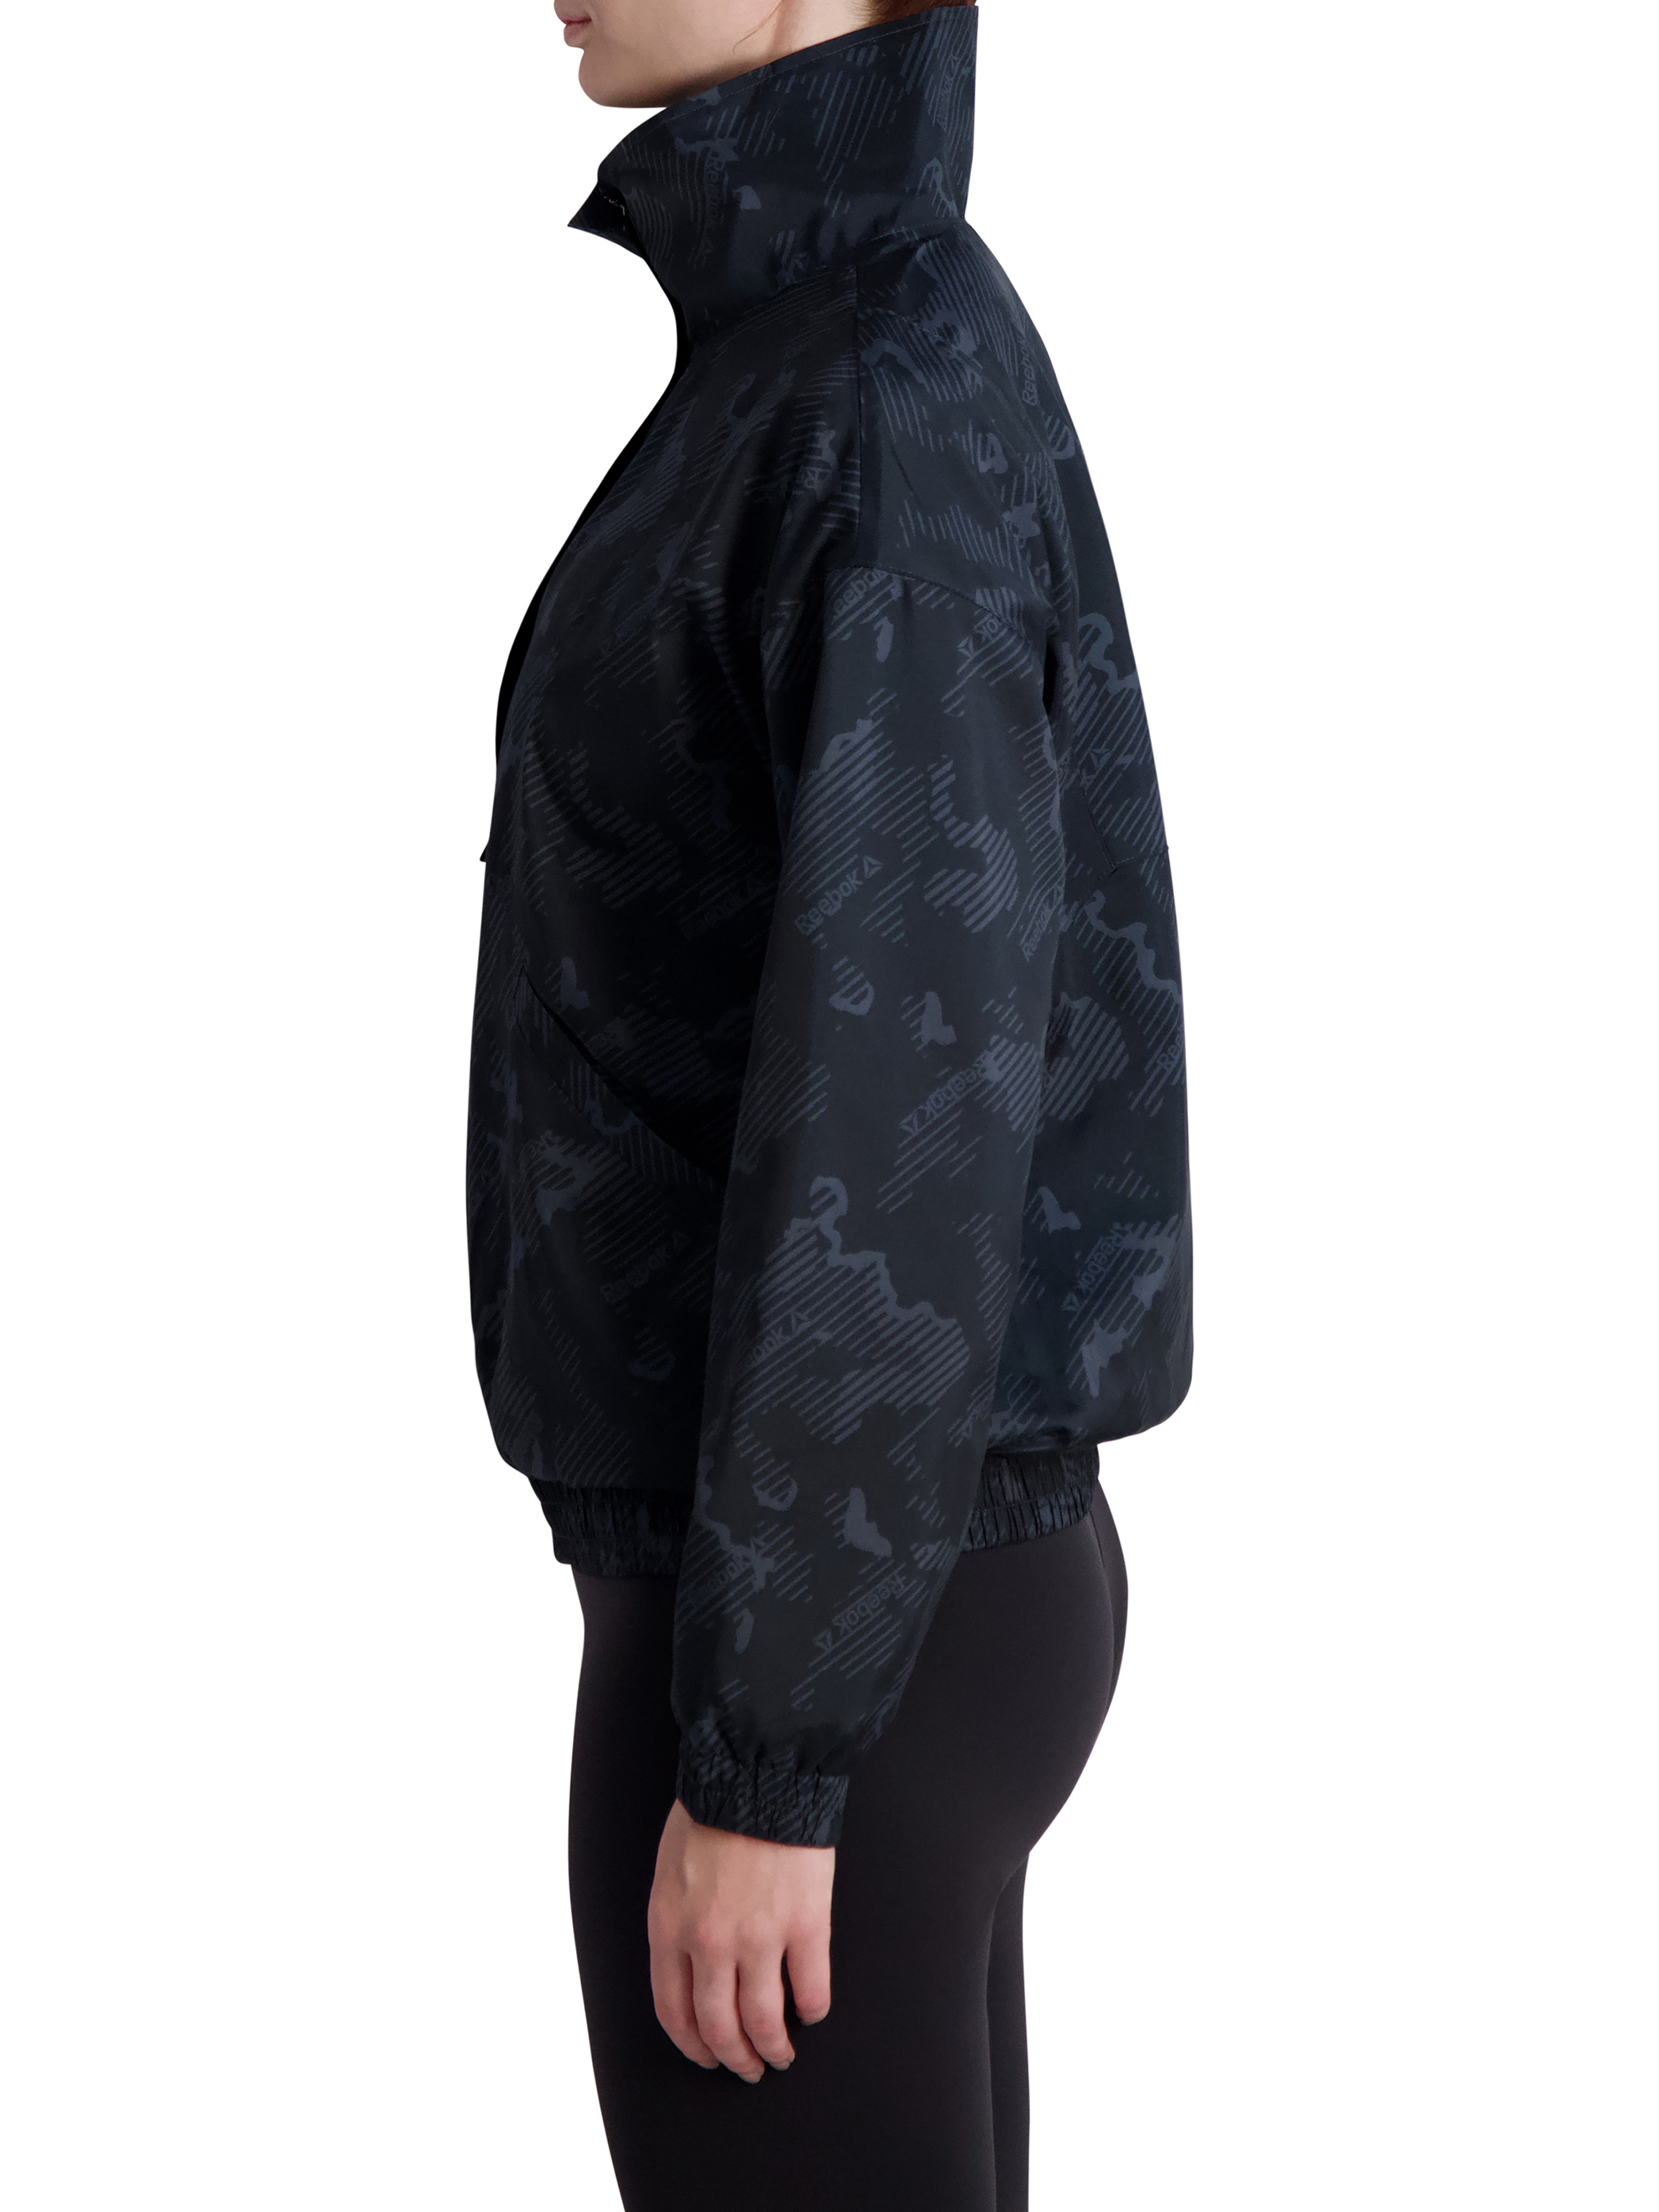 Reebok Women's Mesh Lined Printed Focus Track Jacket with Front Pockets and Front Flap - image 4 of 4